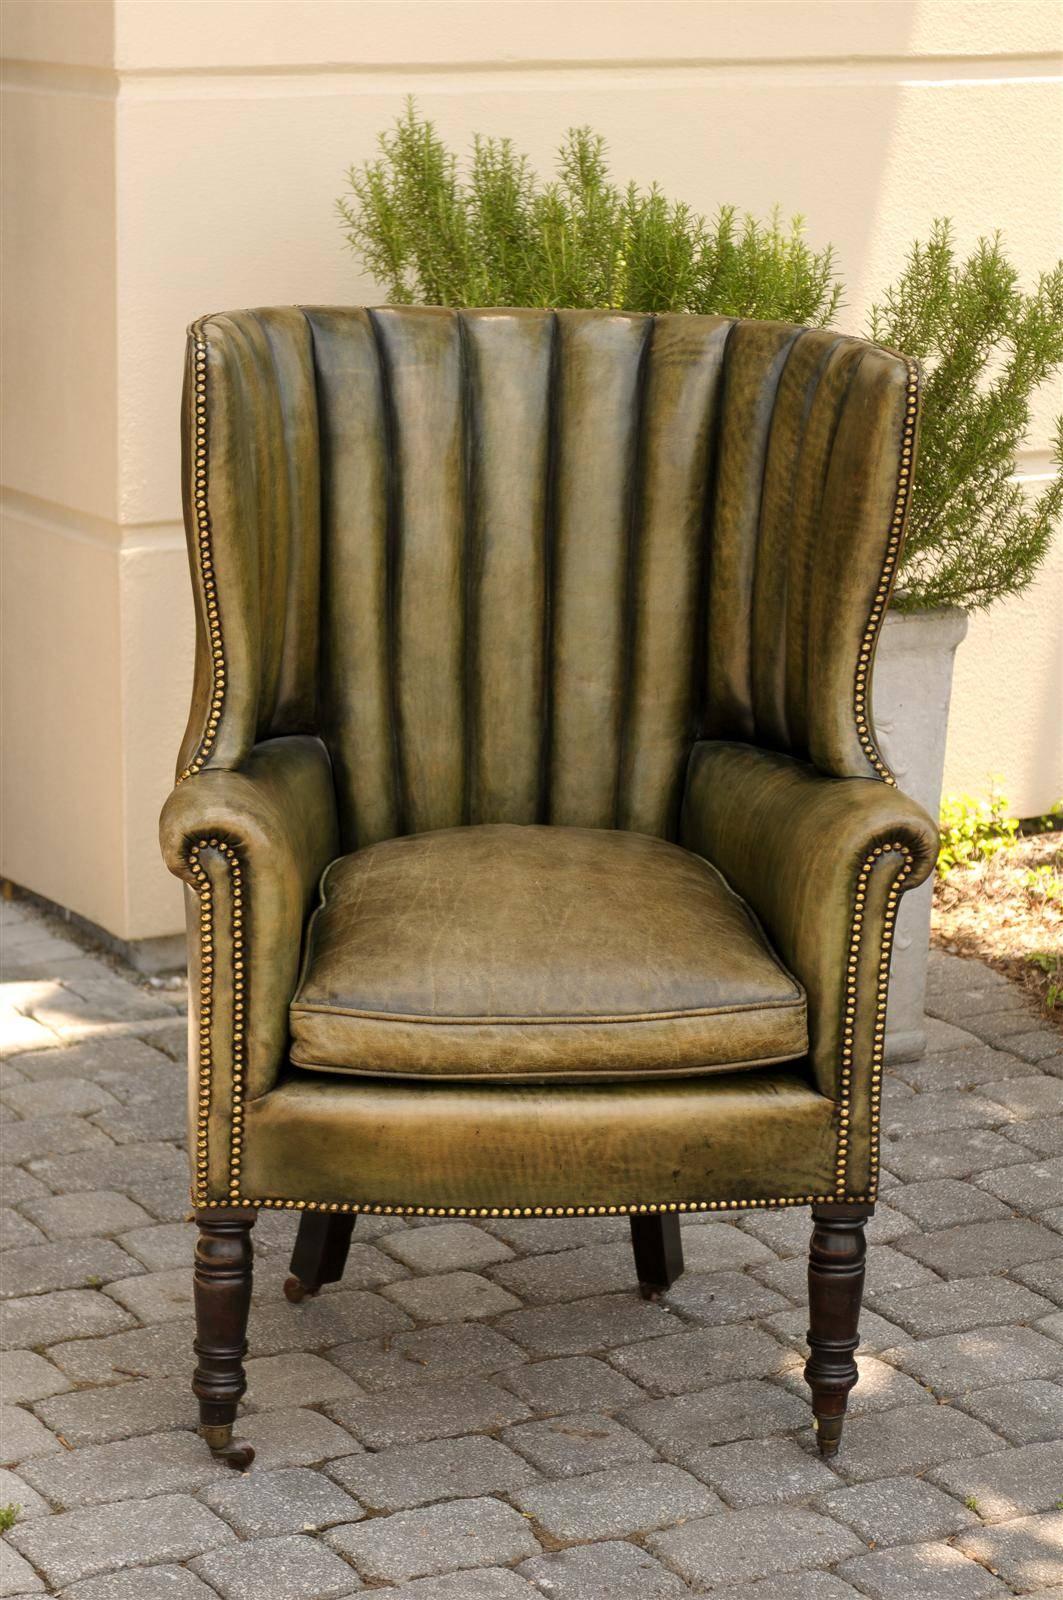 1870 English Library Barrel Wingback Chair in Green Leather Upholstery 1